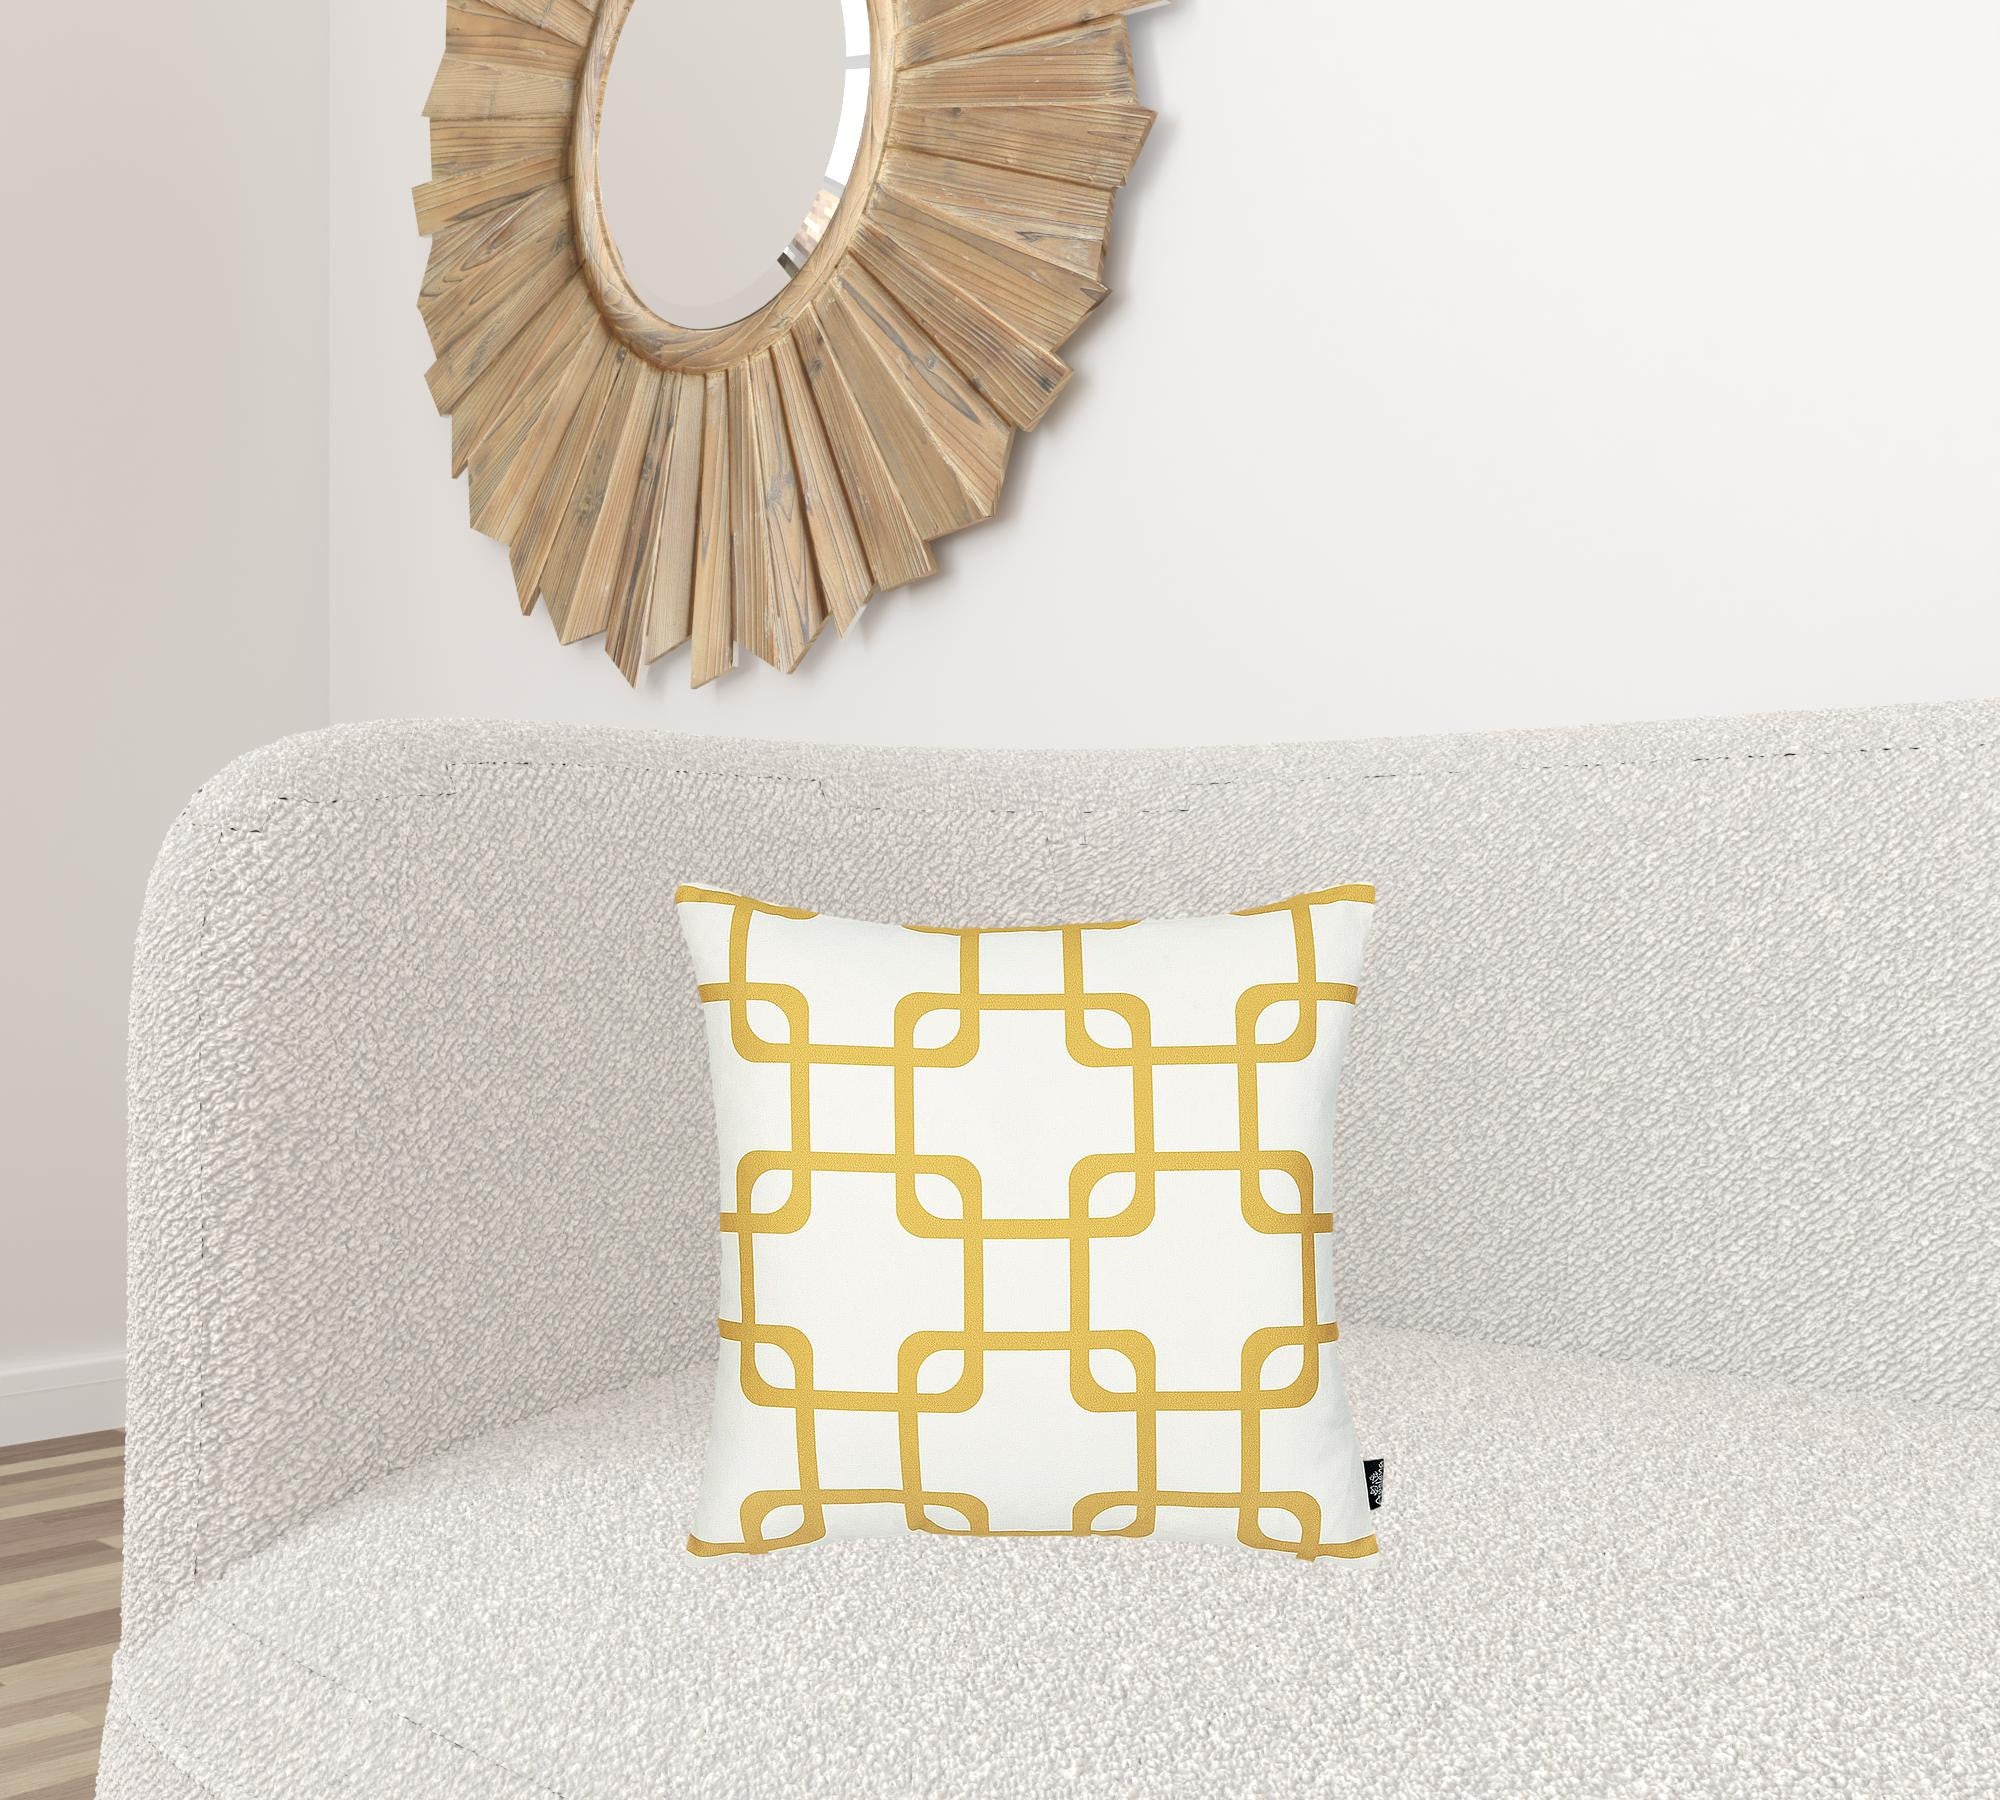 Yellow And White Geometric Squares Decorative Throw Pillow Cover